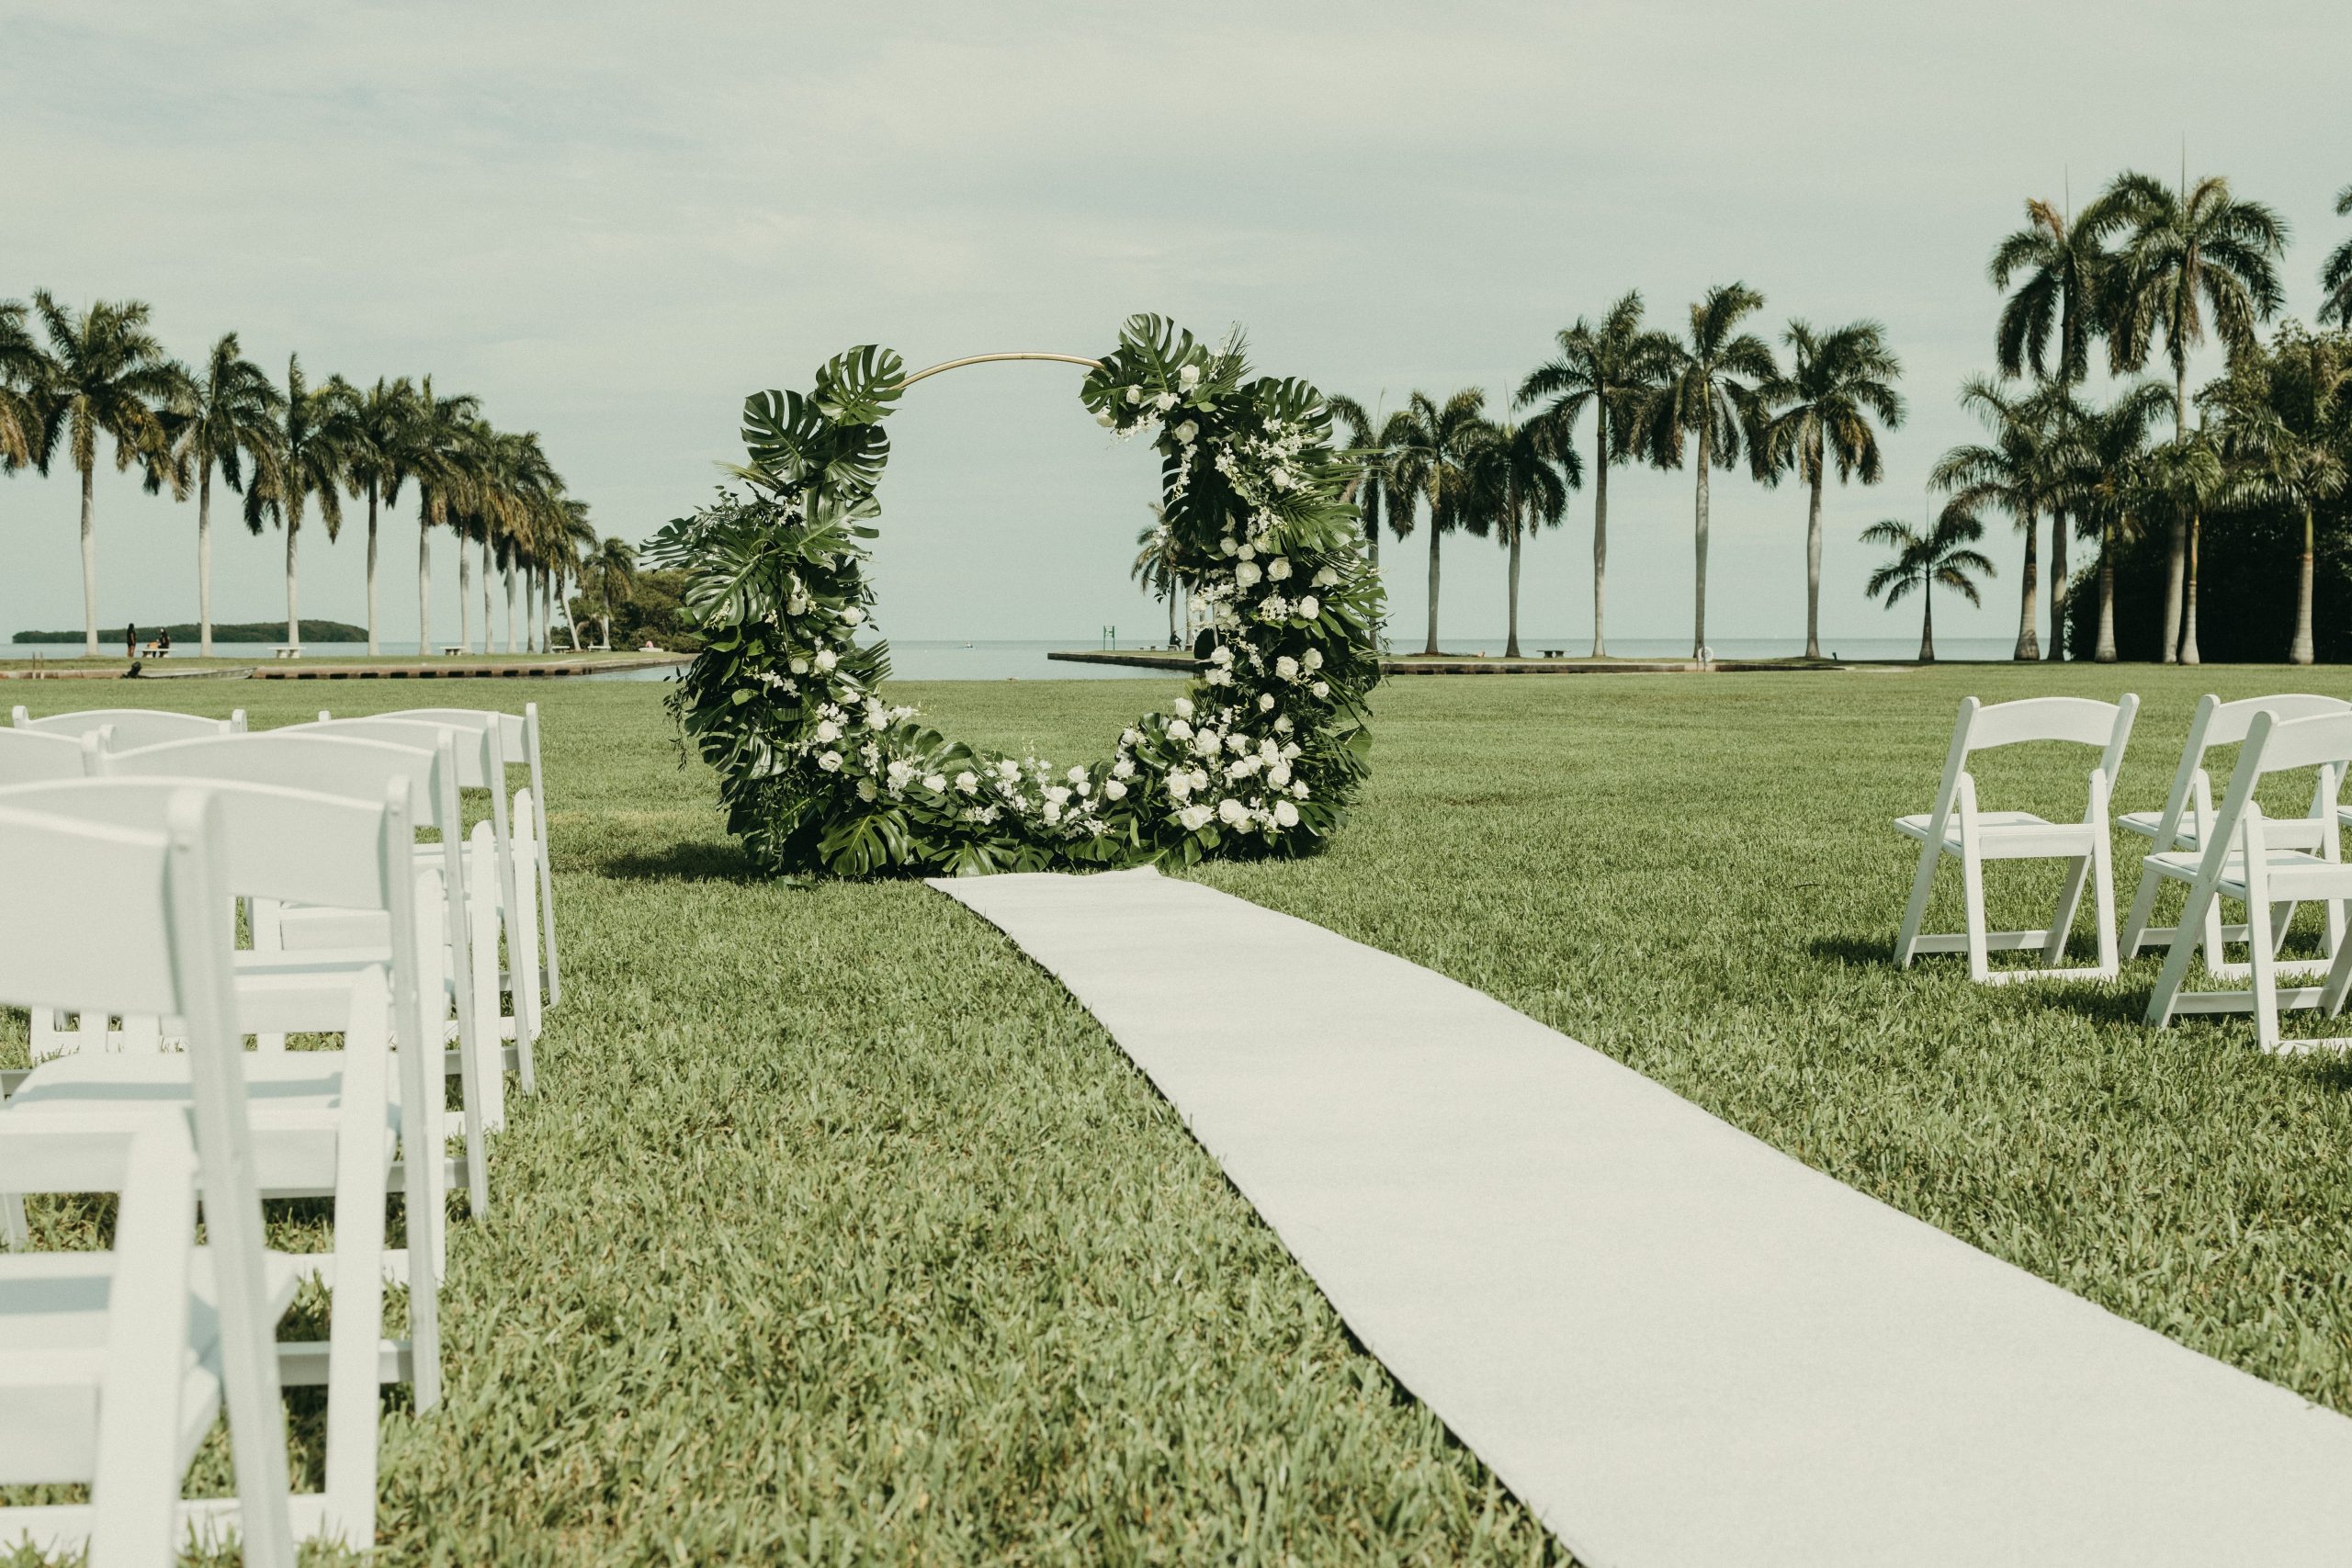 Detail photo of the wedding ceremony arch and aisle at Deering Estate's waterfront lawn